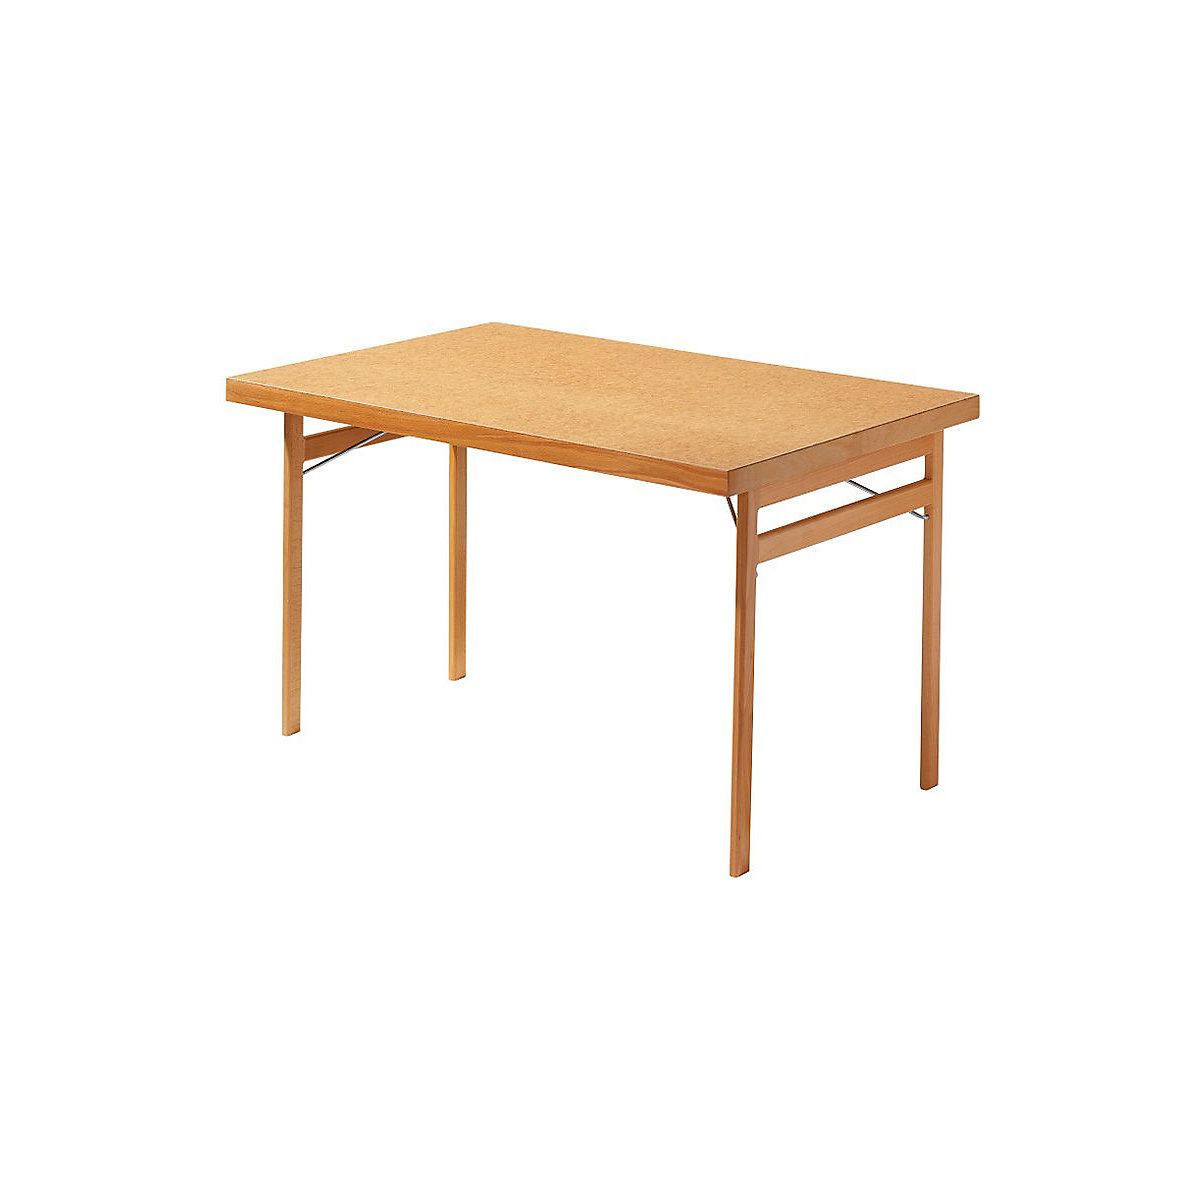 Folding table, solid wood frame, beech, WxD 1200 x 800 mm, wood tabletop-4